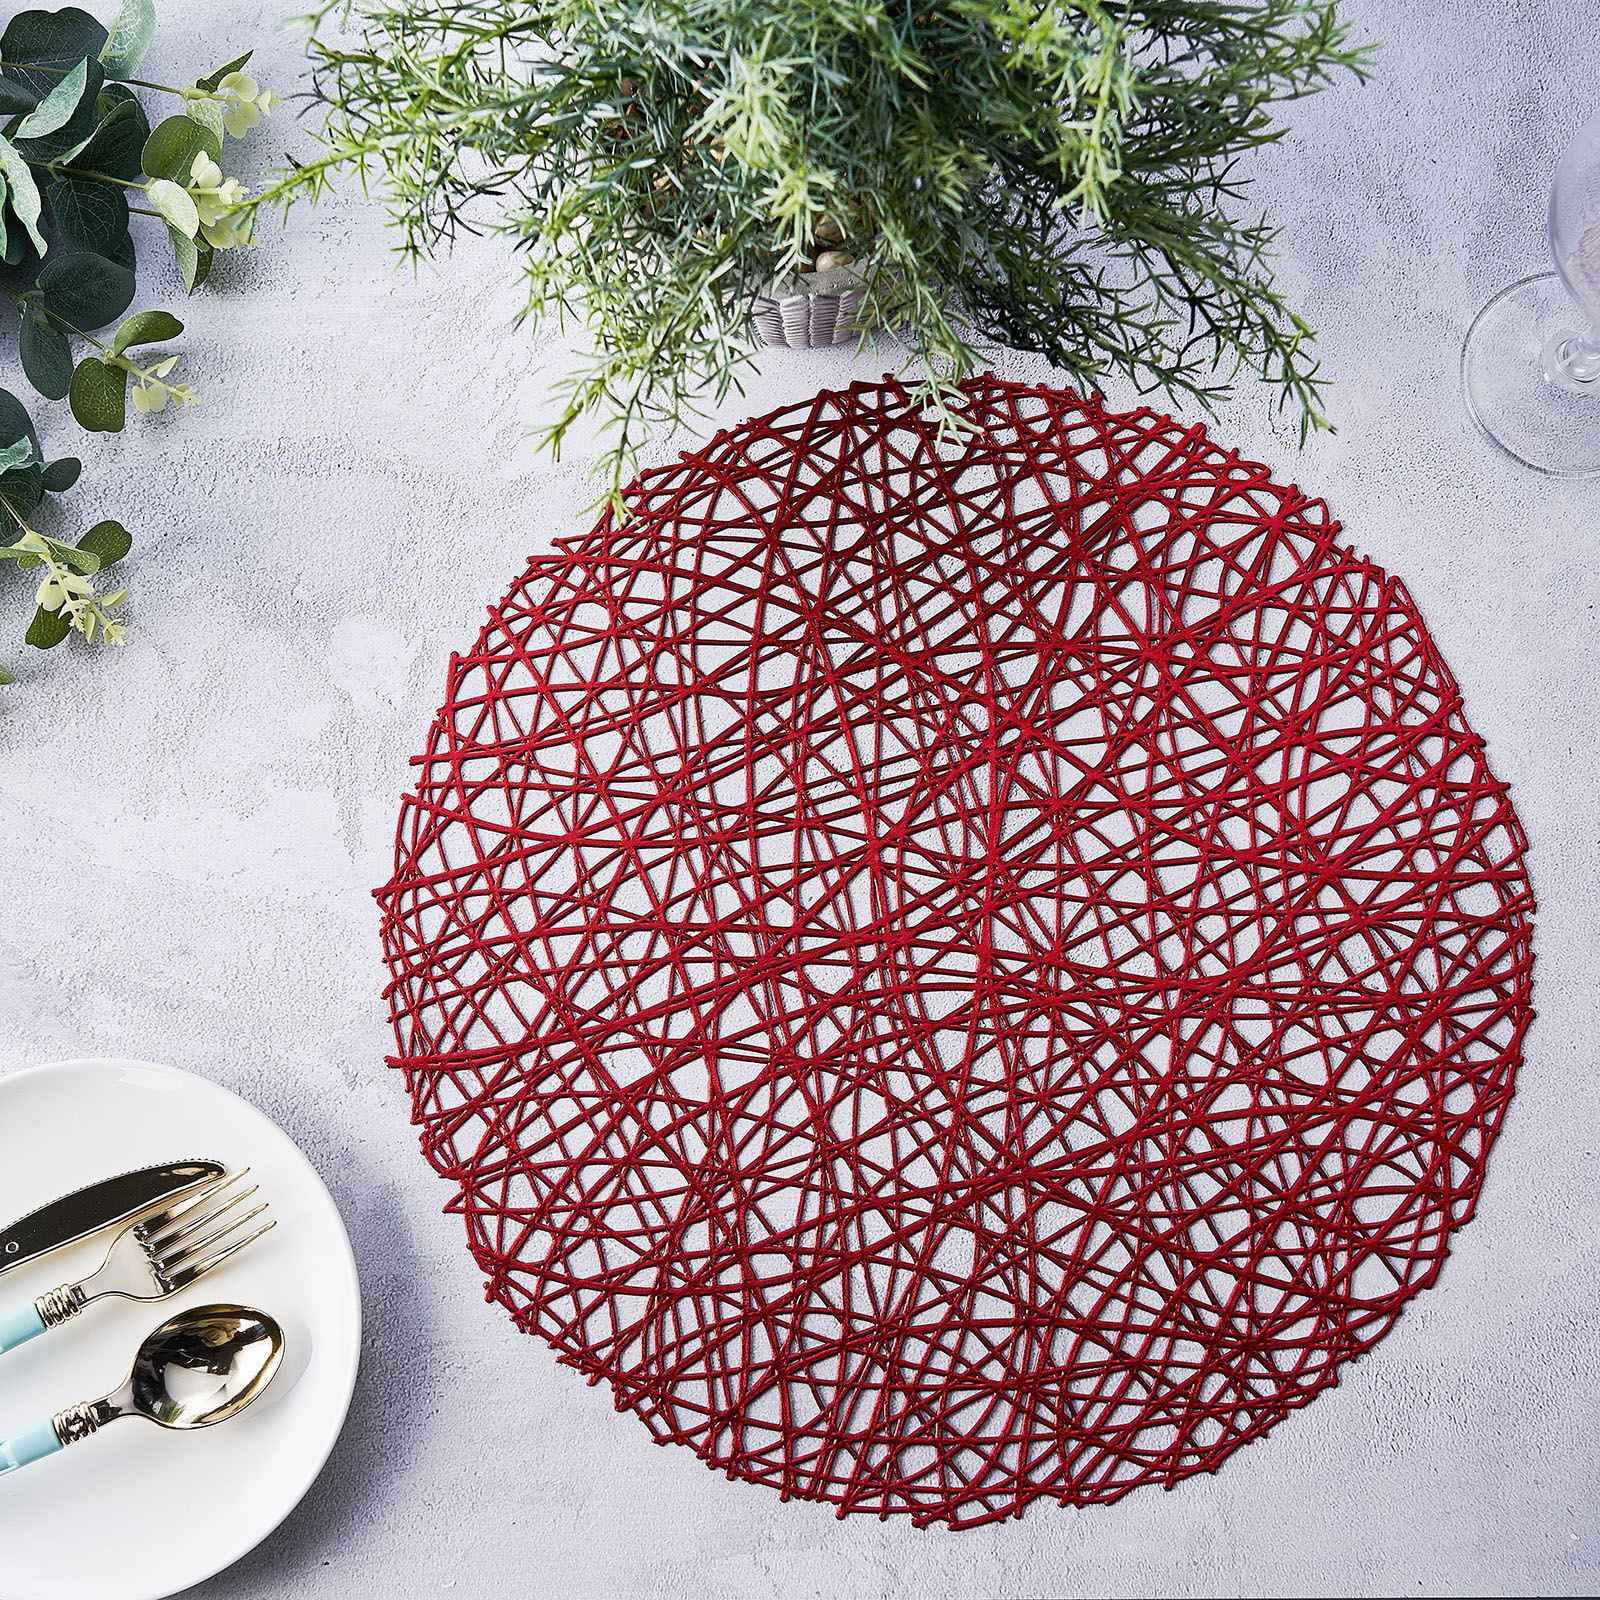 efavormart-6-pack-15-red-round-woven-vinyl-placemats-non-slip-dining